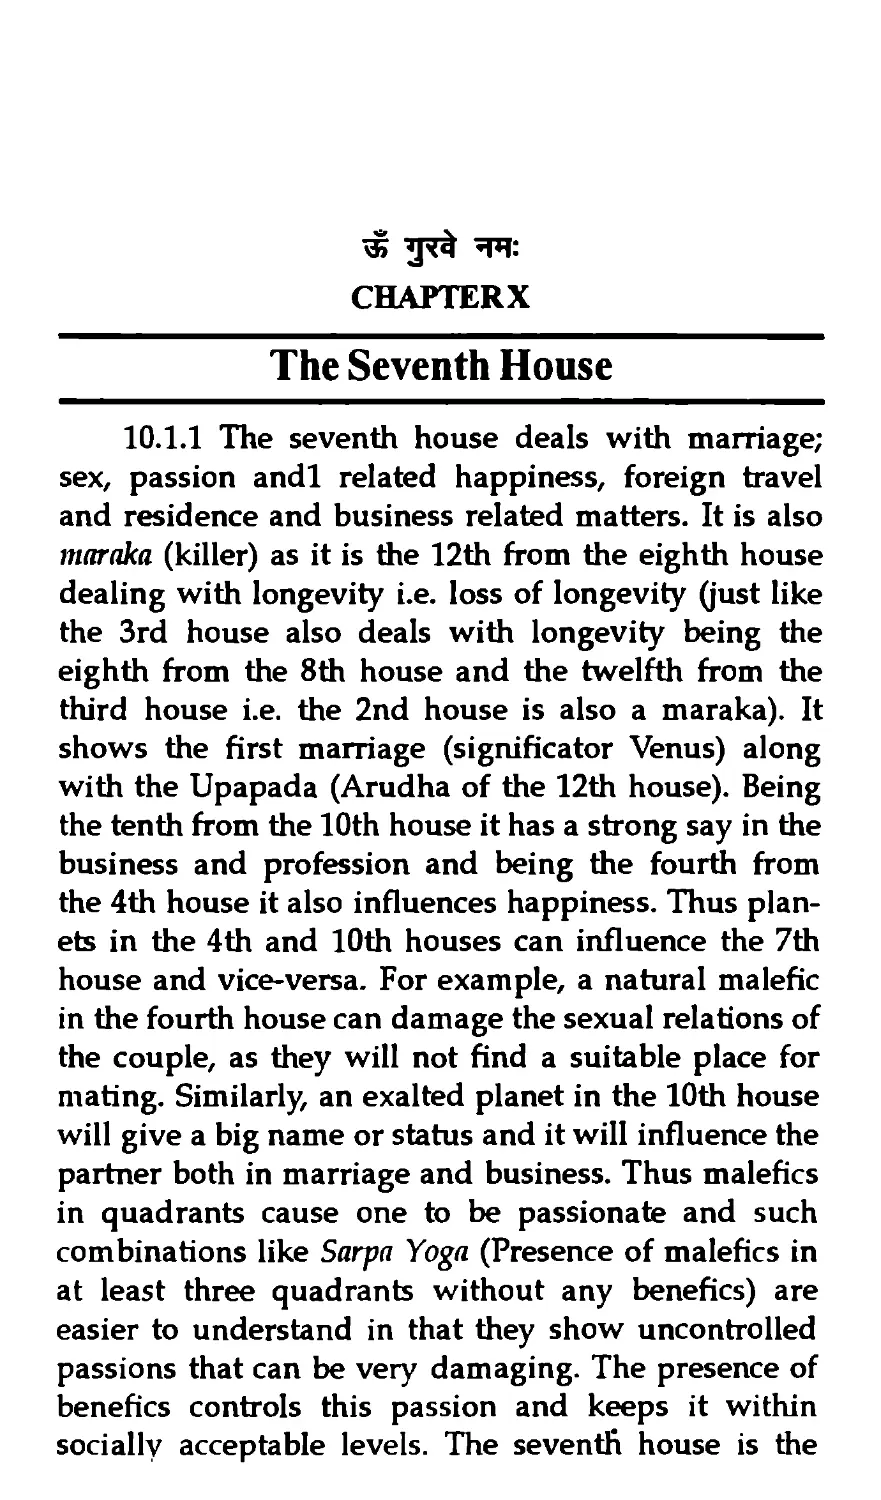 The Seventh House